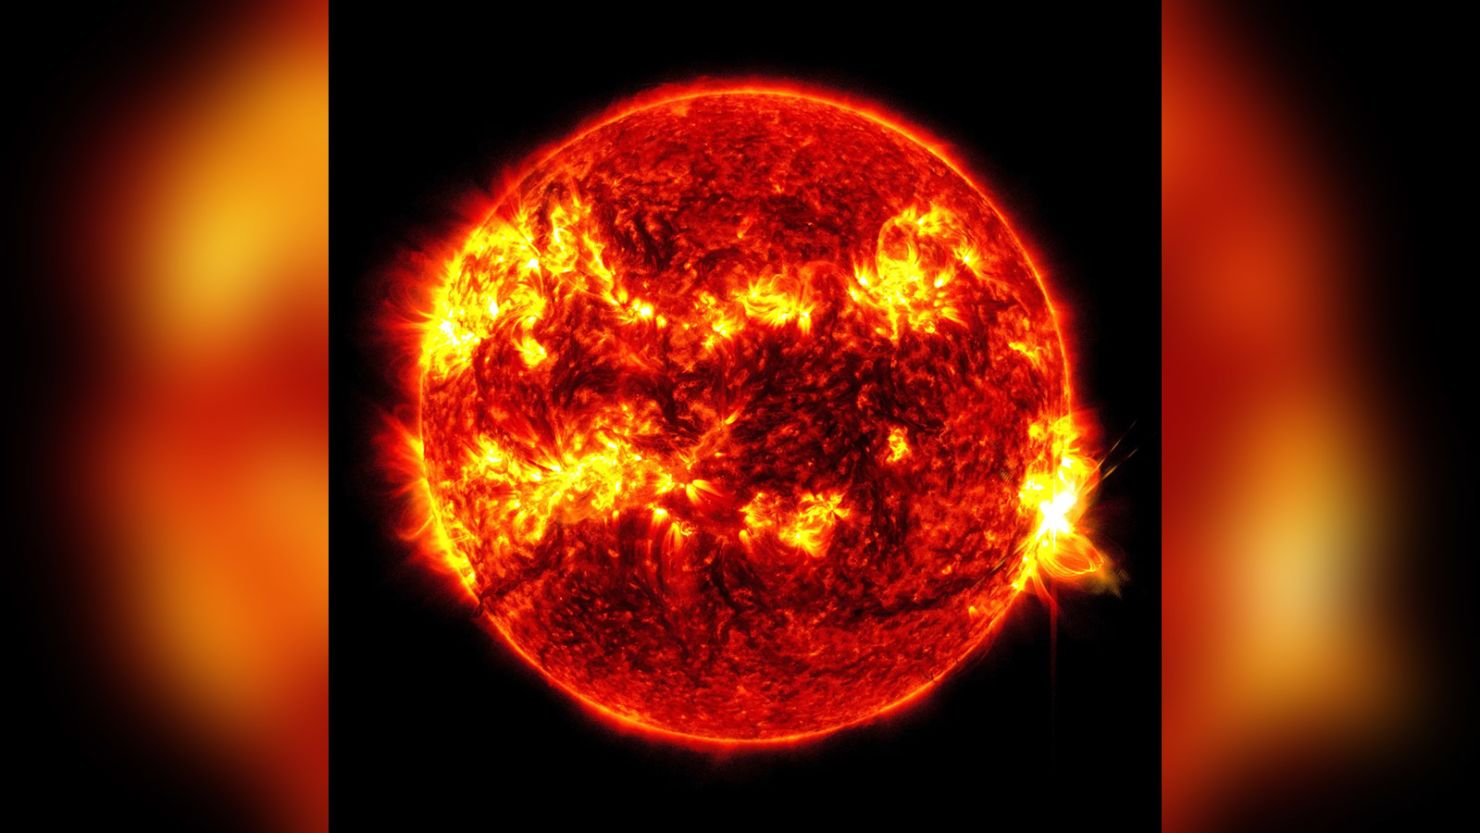 The flash of light pictured on the right side of the Sun was captured by NASA’s Solar Dynamics Observatory. The observatory is constantly observing the Sun.